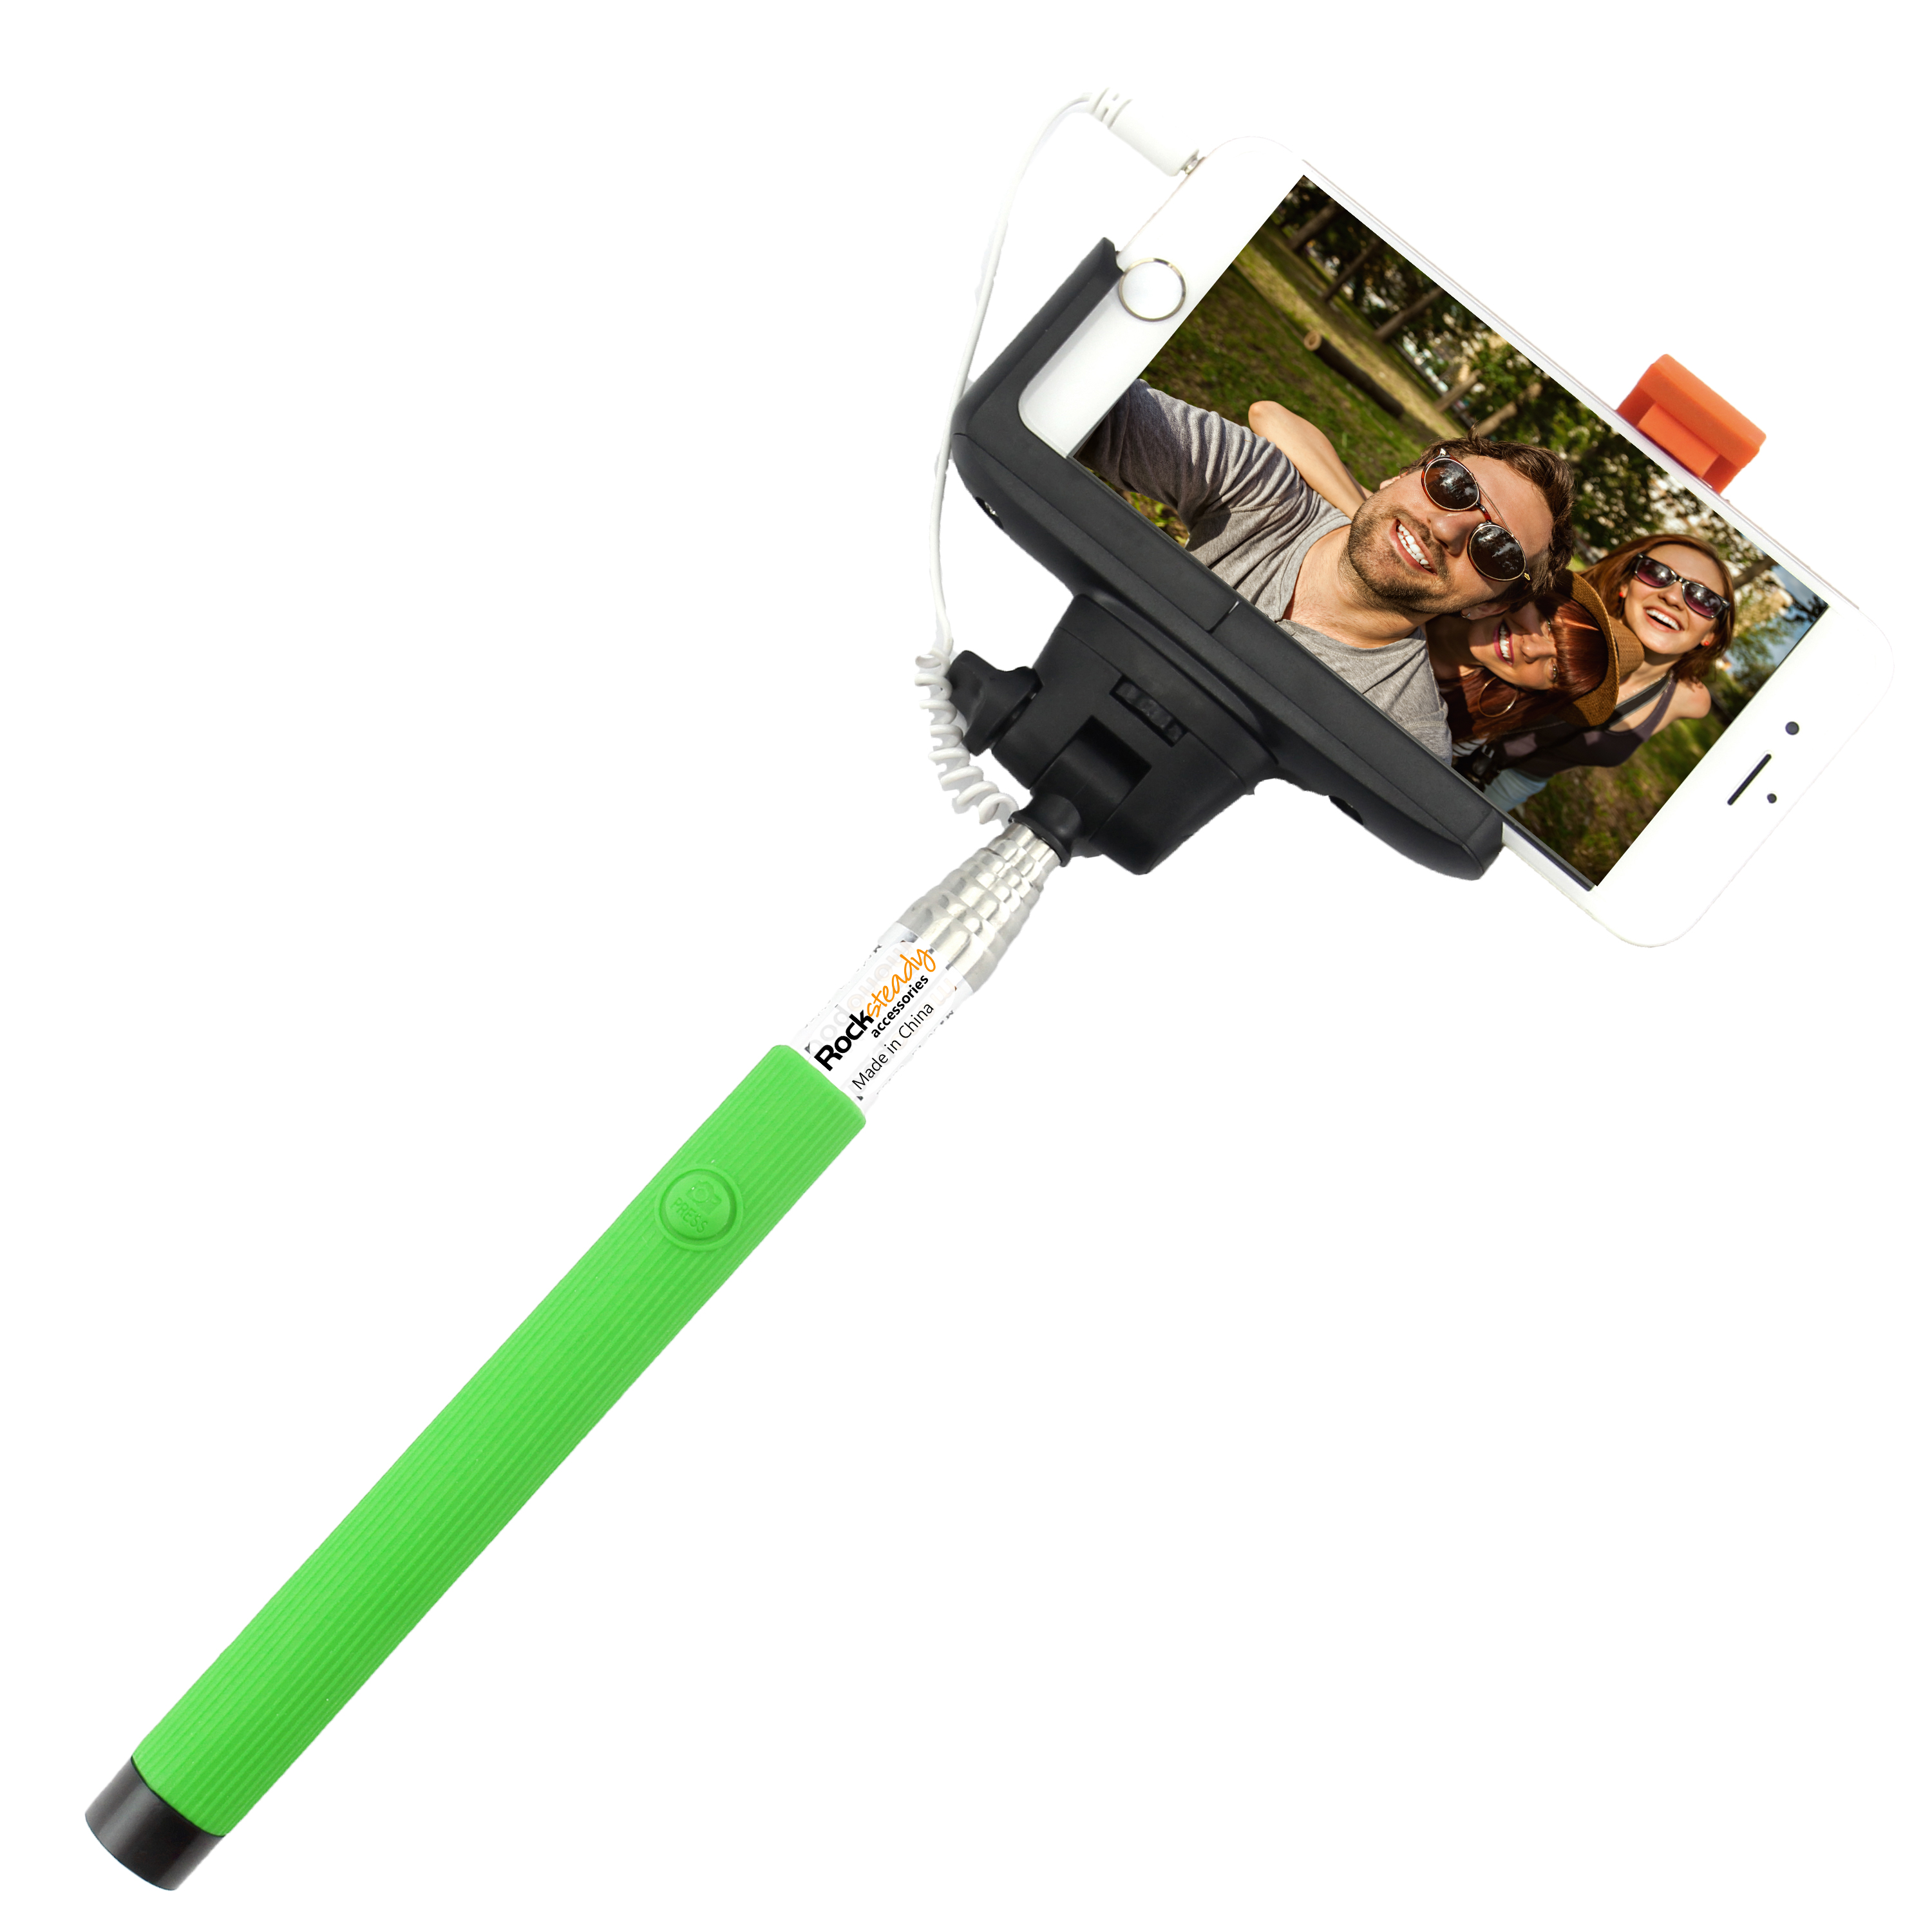 Rocksteady Selfie-WRD-Green Wired Selfie Stick with Wired Control Green